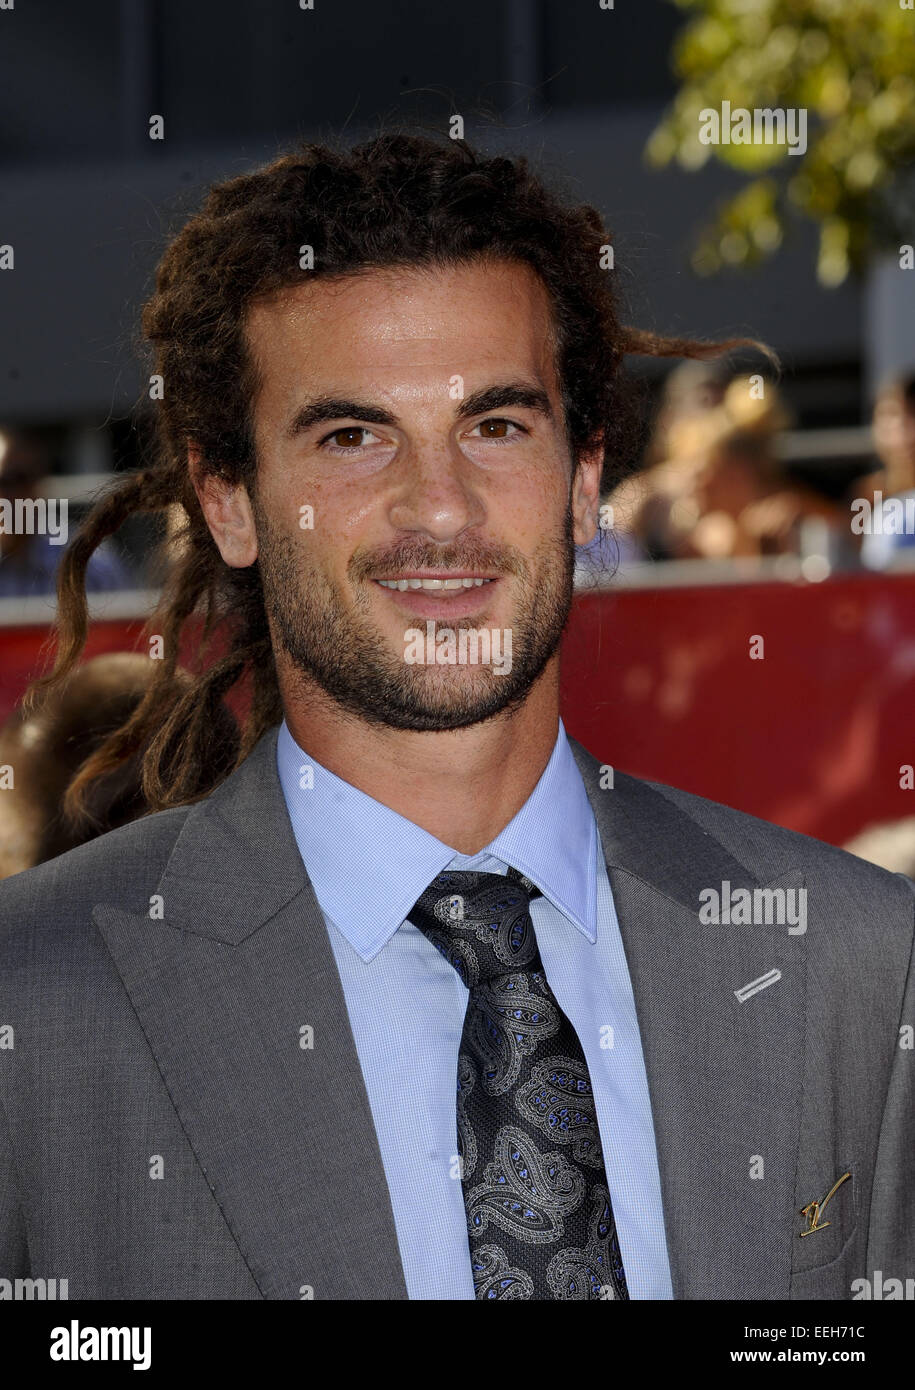 2014 ESPYS Awards - Arrivals  Featuring: Kyle Beckerman Where: Los Angeles, California, United States When: 17 Jul 2014 Stock Photo